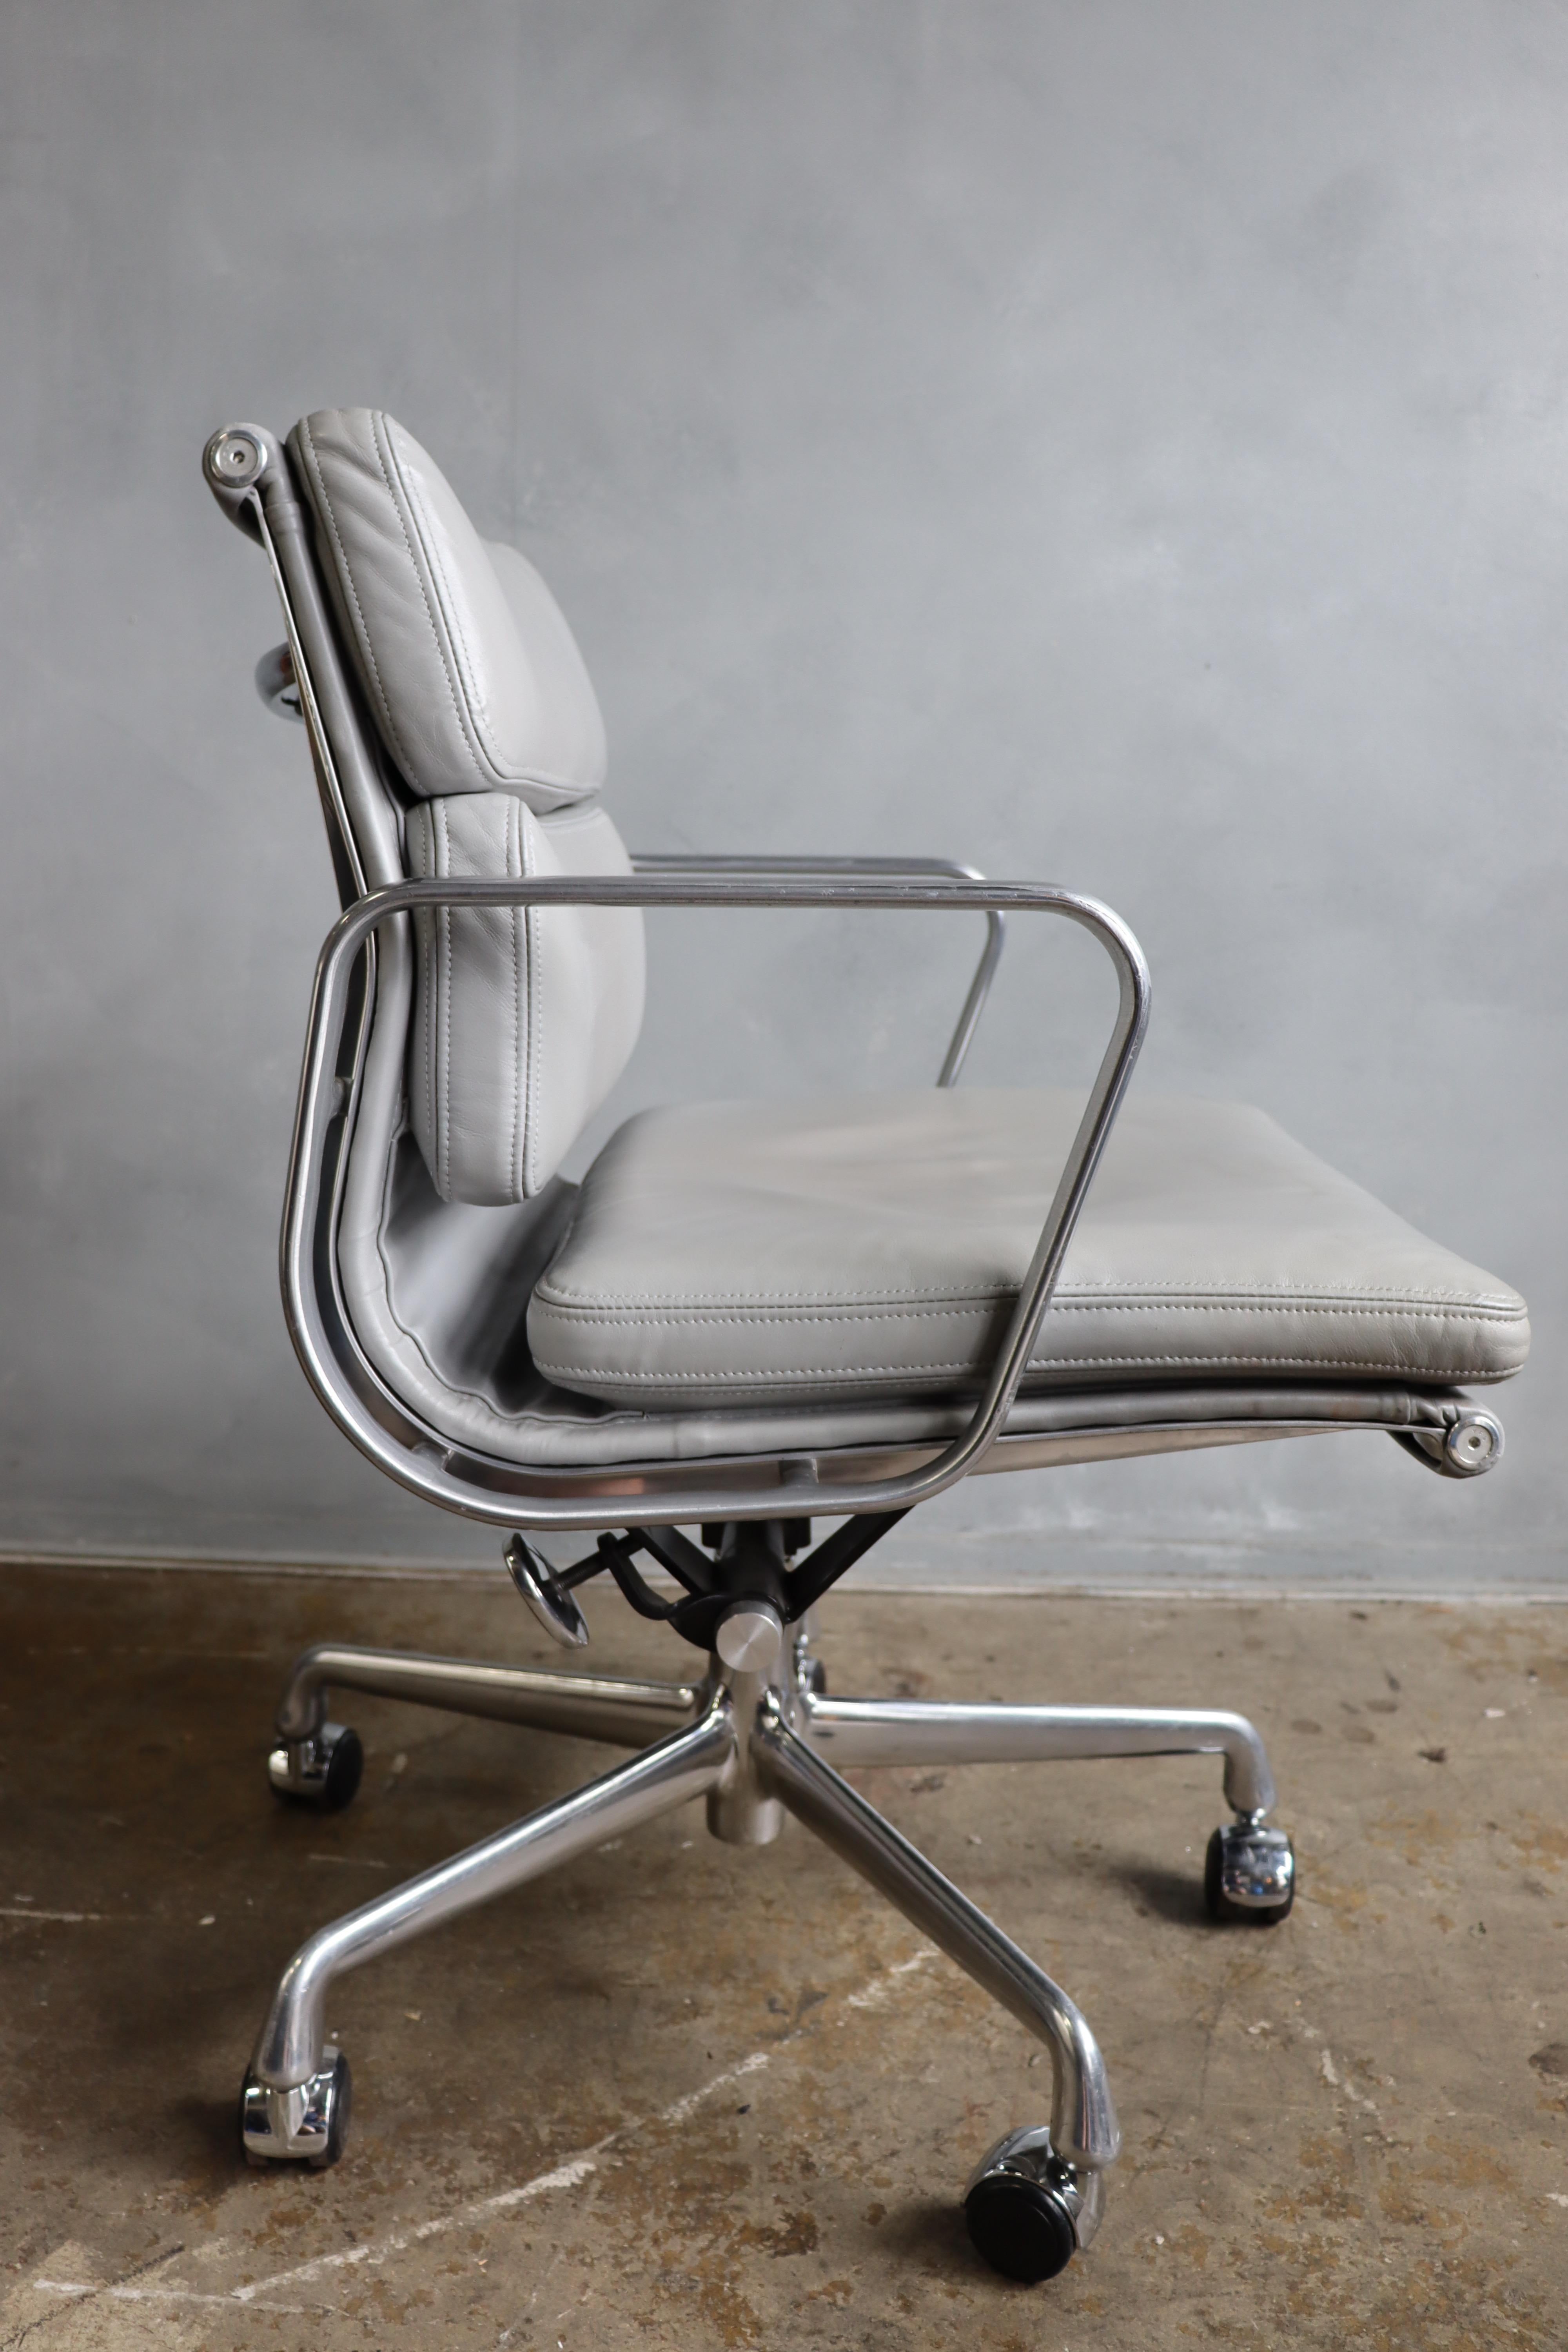 For your consideration is this authentic Eames for Herman Miller vintage soft pad chairs in silver / grey leather. Adjustable tilt on a 5 star base. These authentic vintage examples are icons of Mid-Century Modern design. These chairs are part of